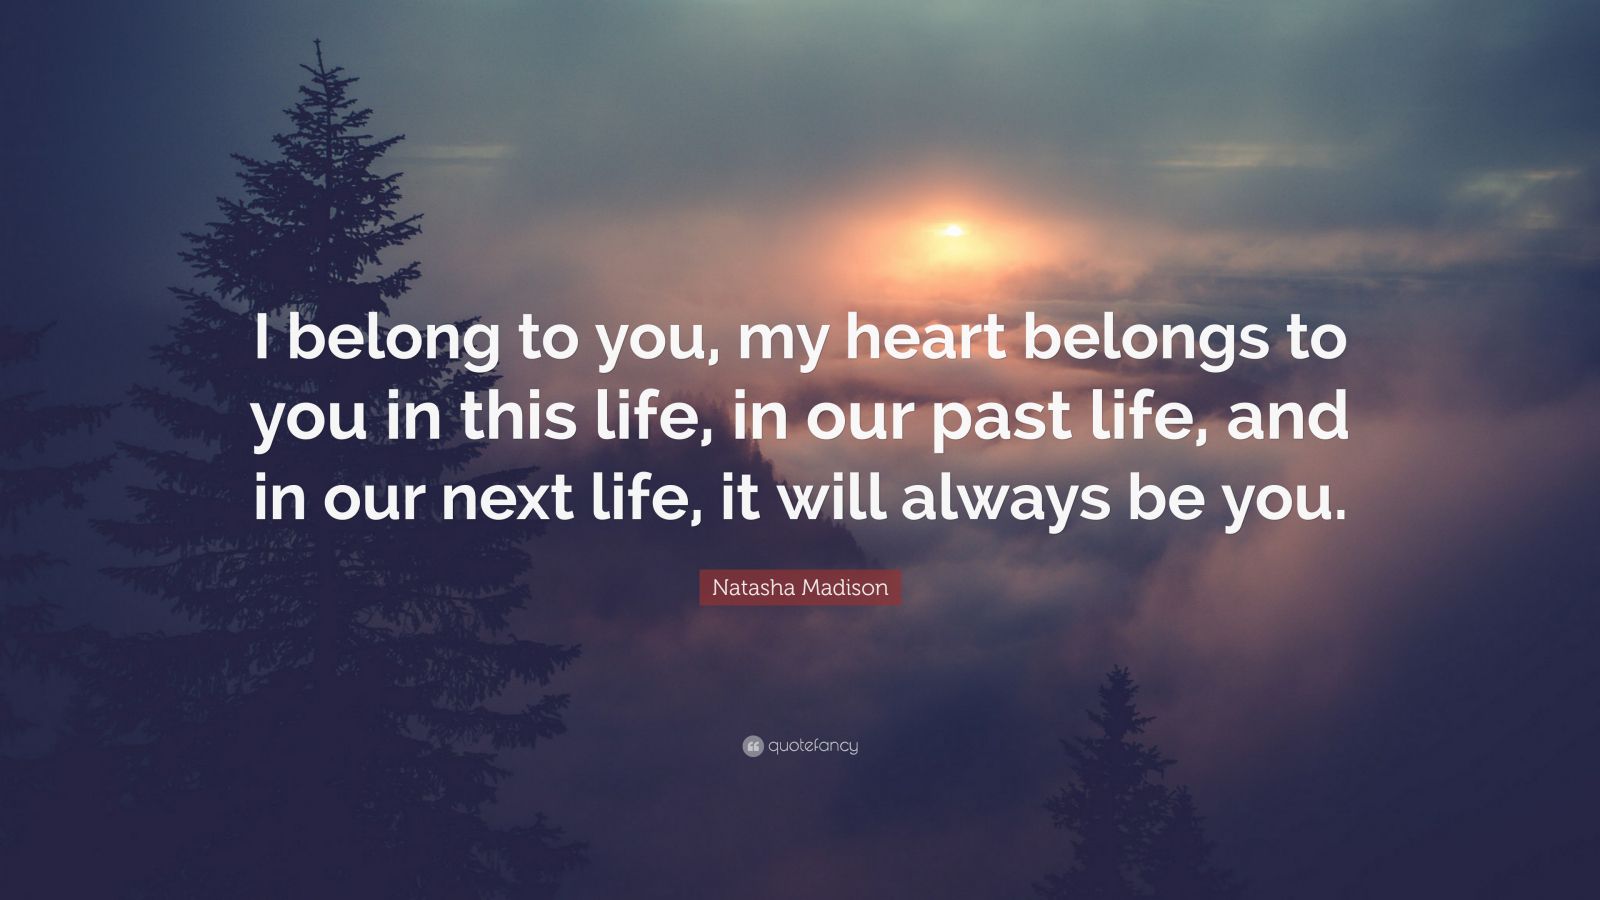 Natasha Madison Quote: “I belong to you, my heart belongs to you in this  life, in our past life, and in our next life, it will always be you.”